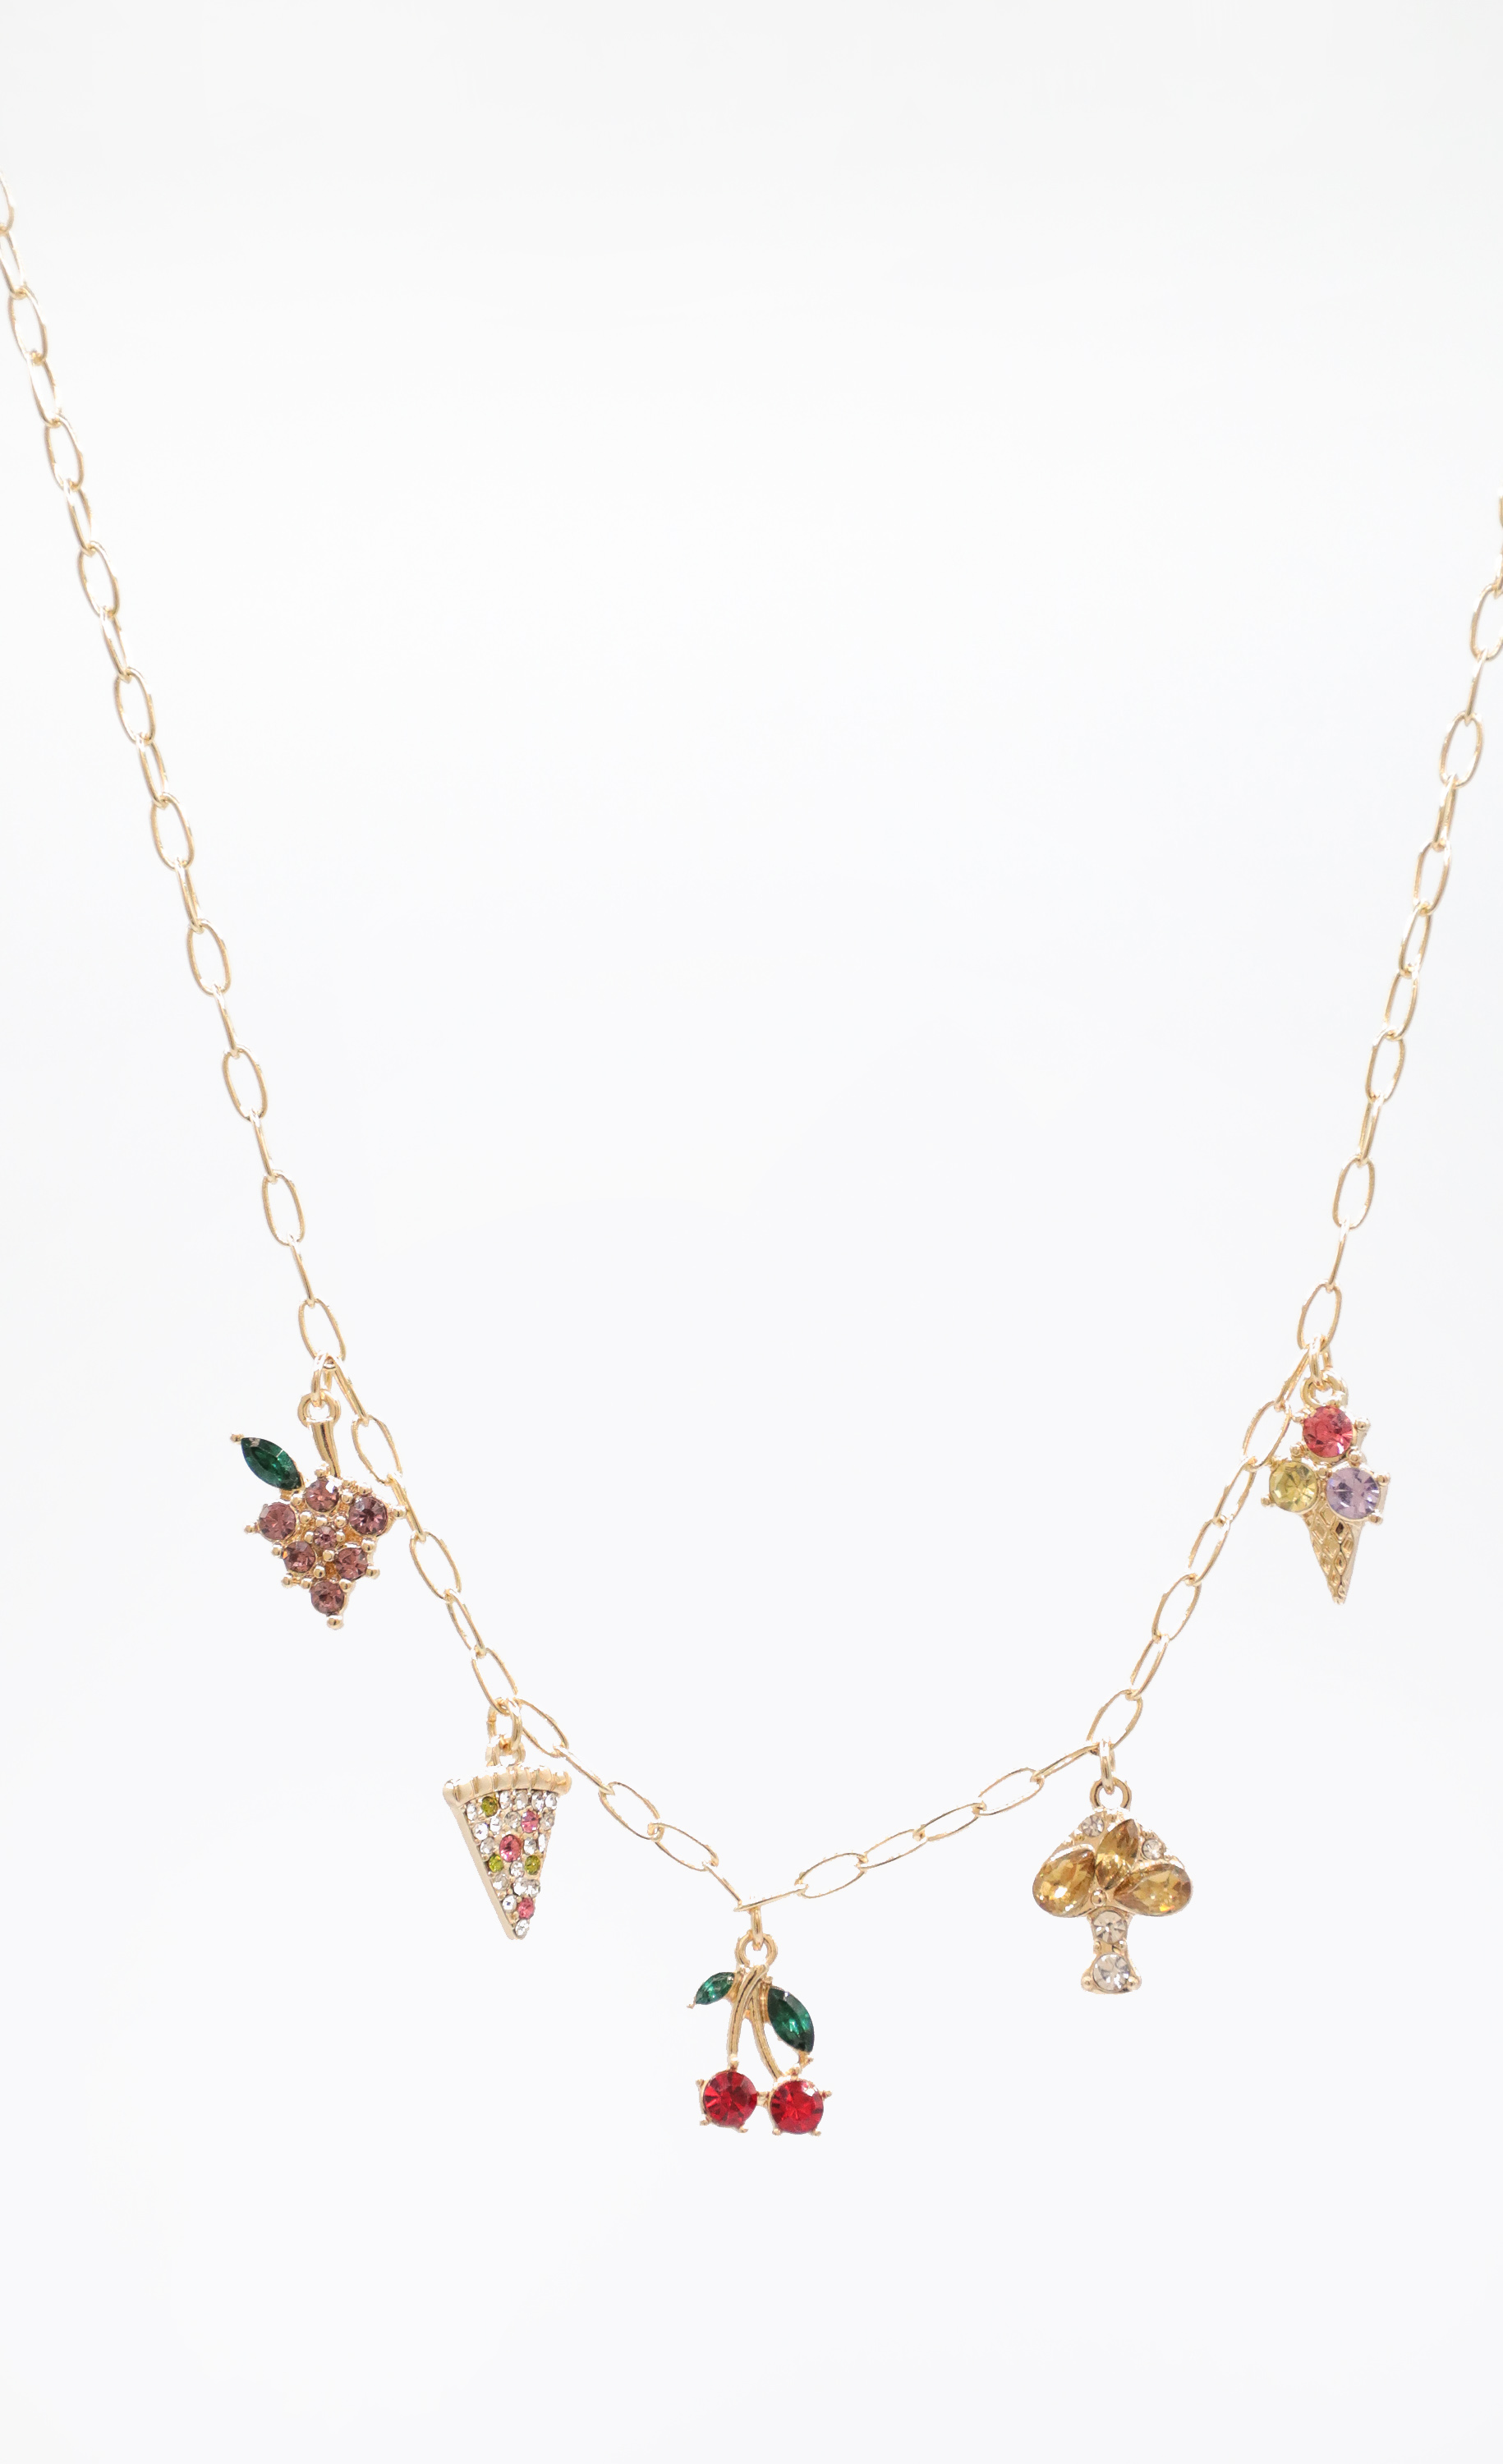 Guilty Pleasure Necklace in Gold